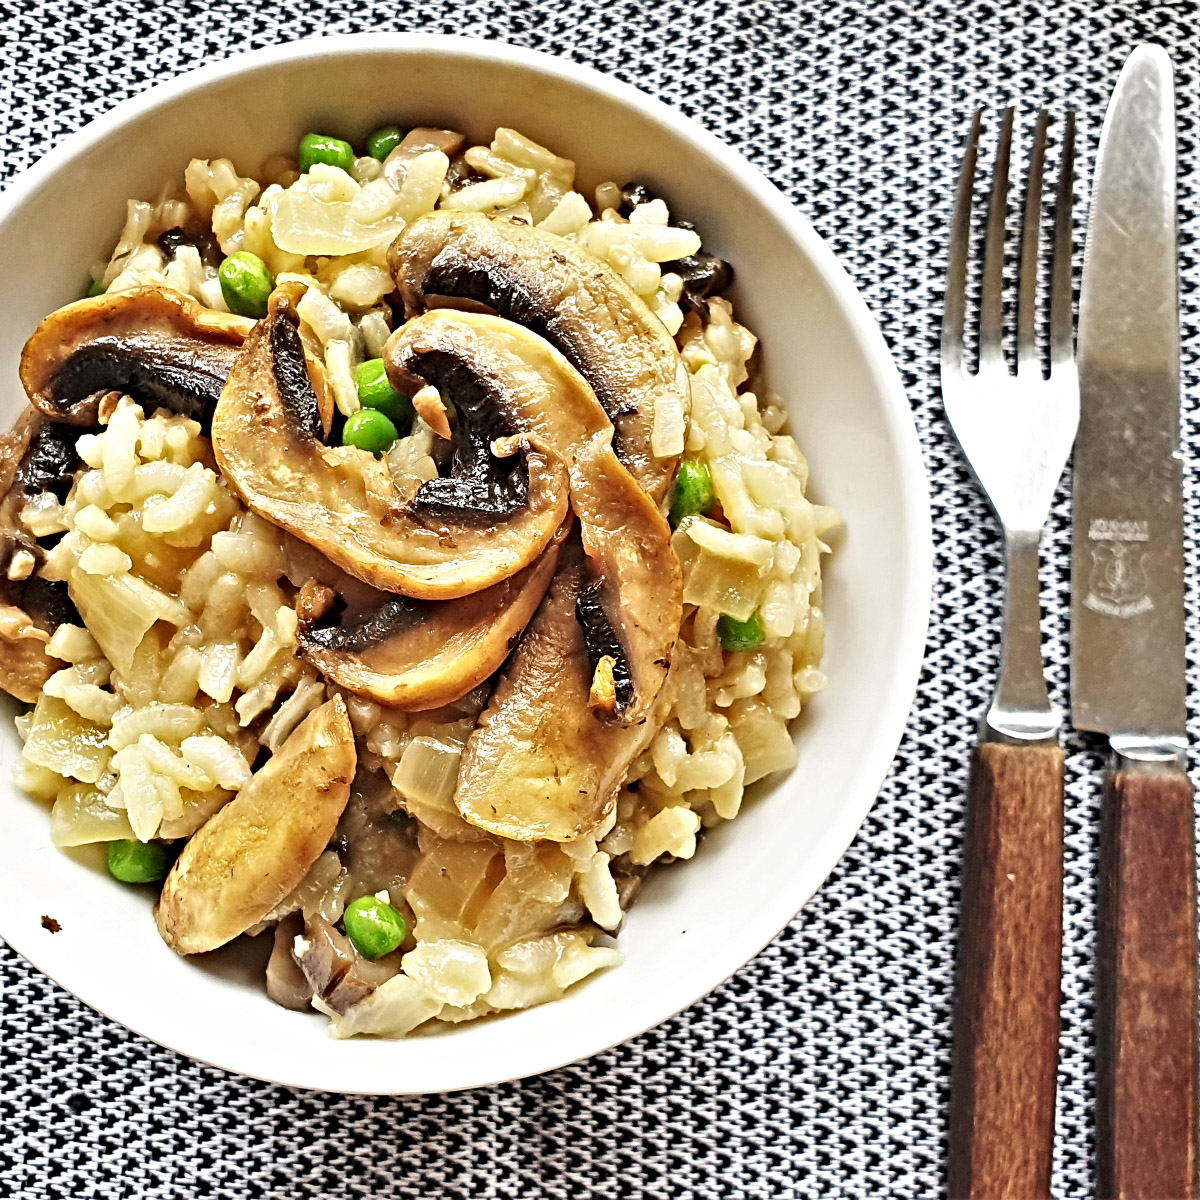 Mushroom and Pea Risotto (without wine) - The Natural Nurturer